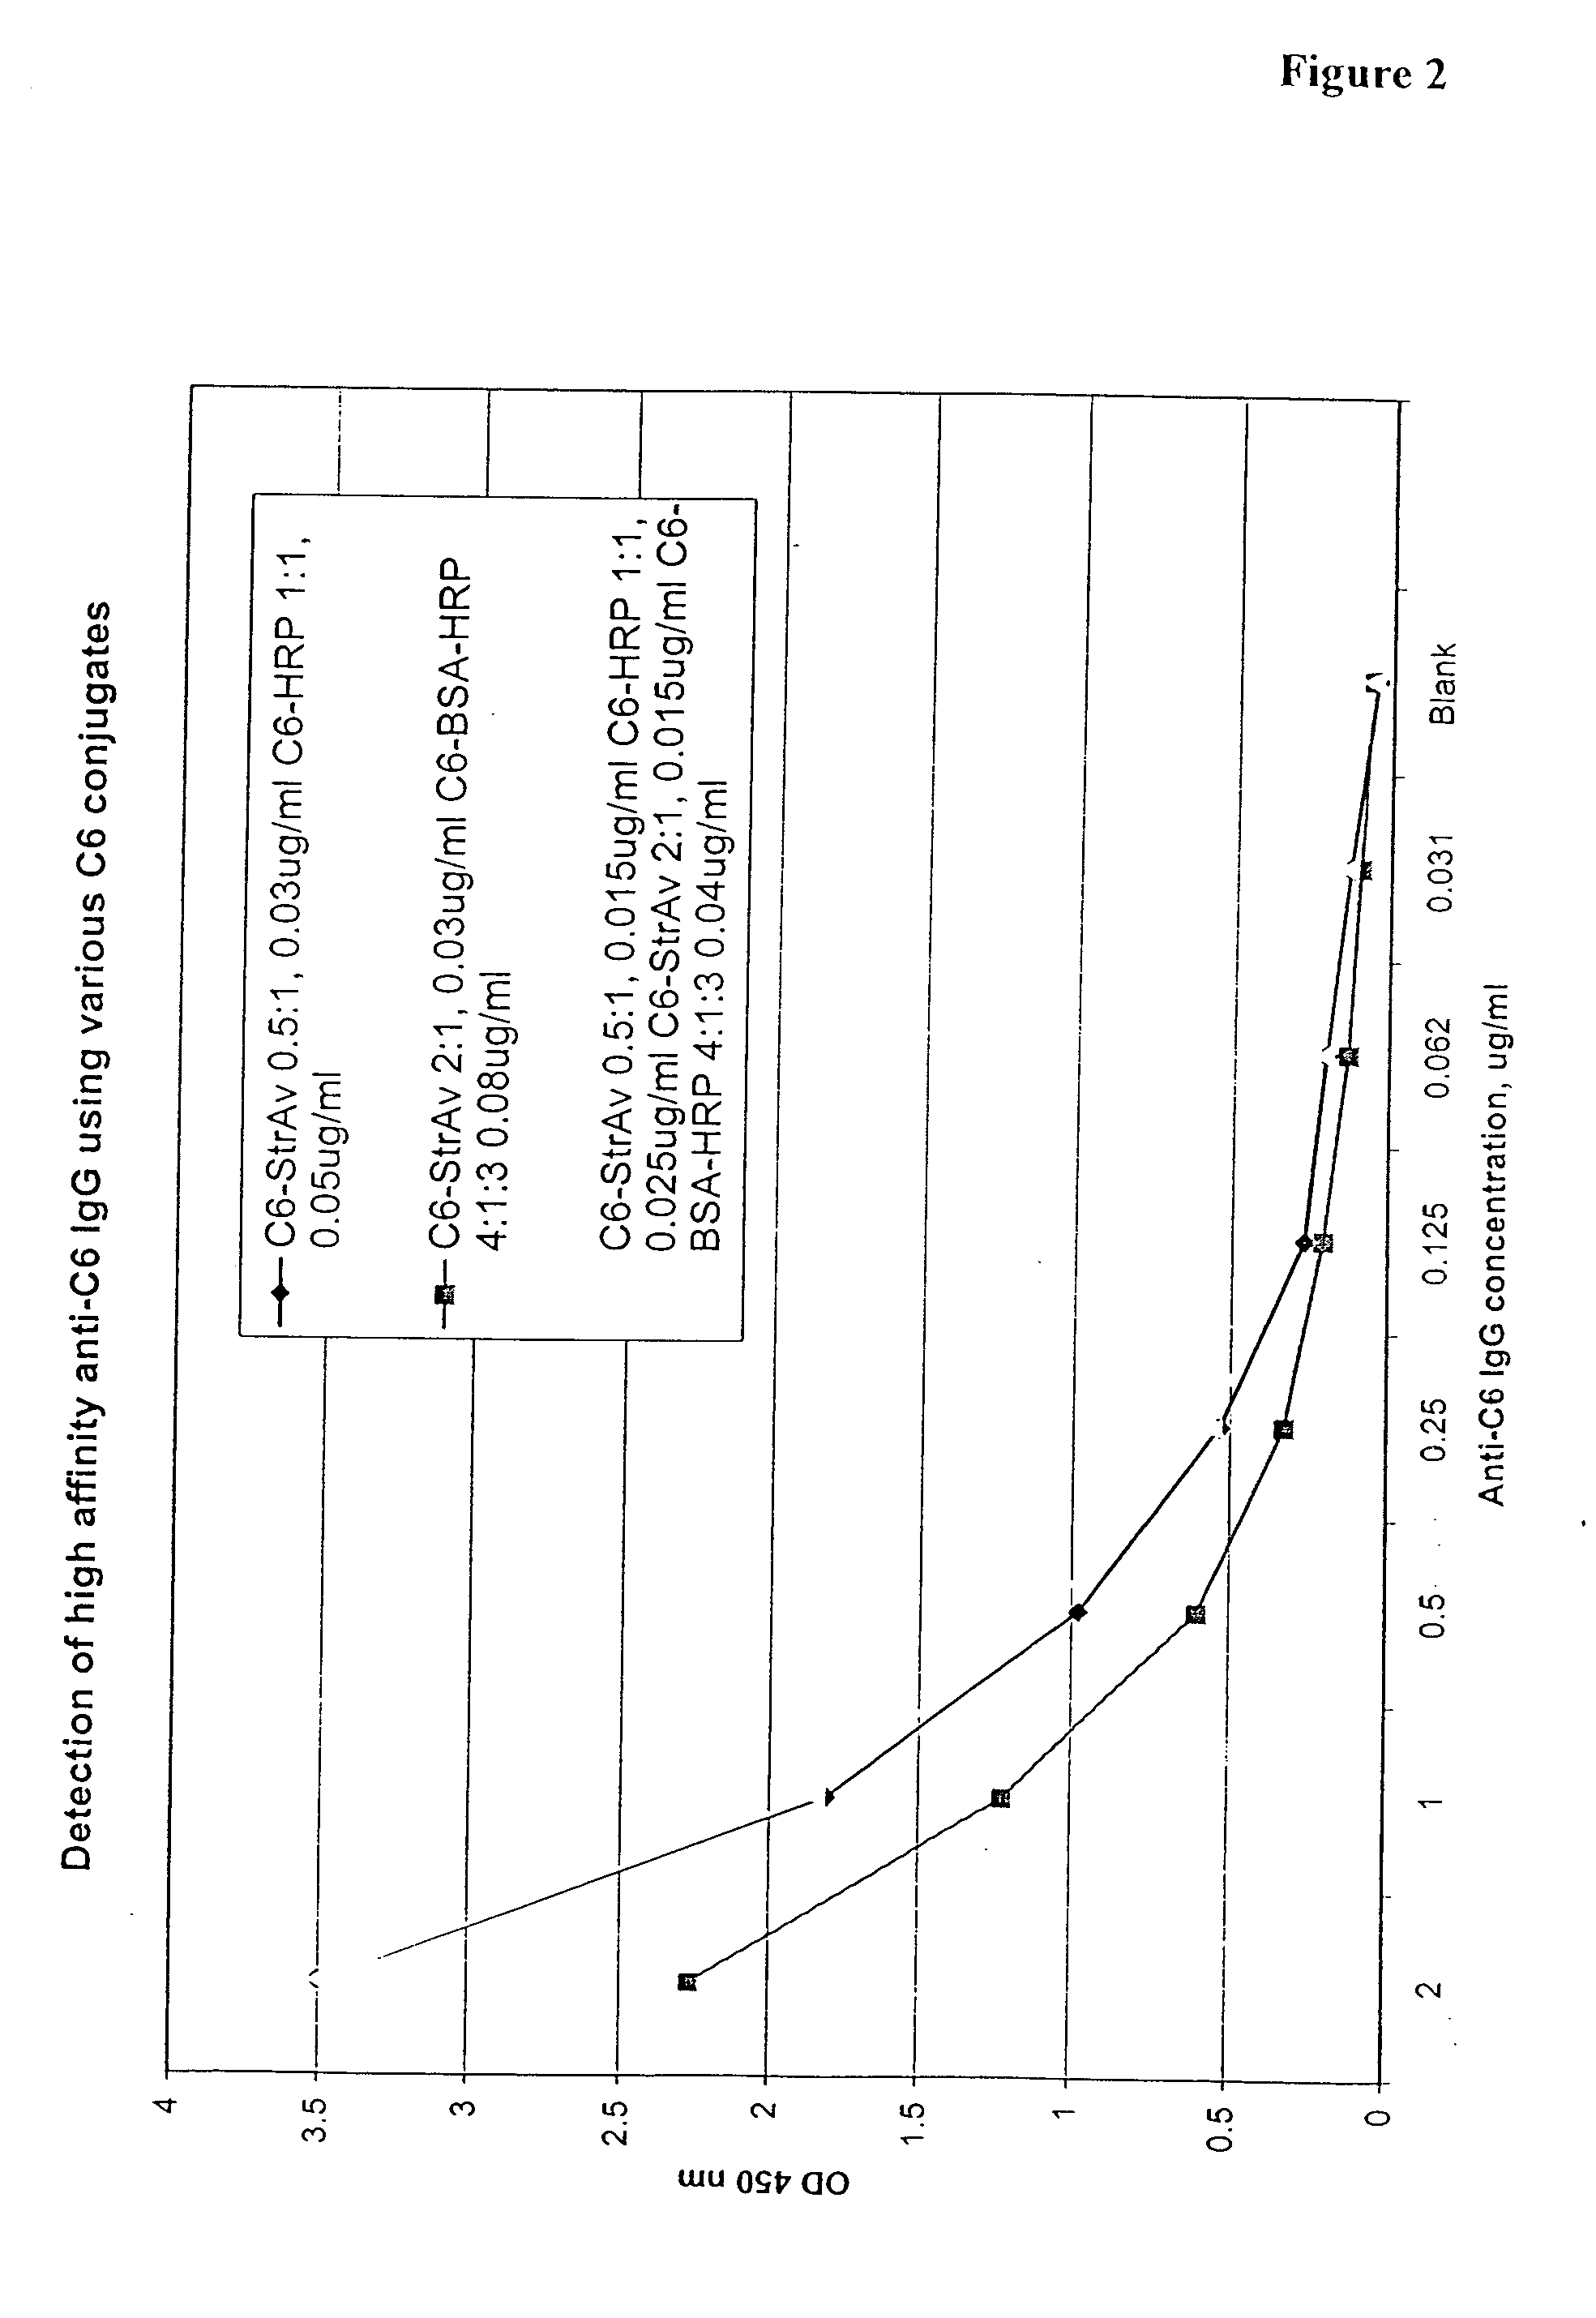 System and methods for detection of bacillus anthracis related analytes in biological fluids